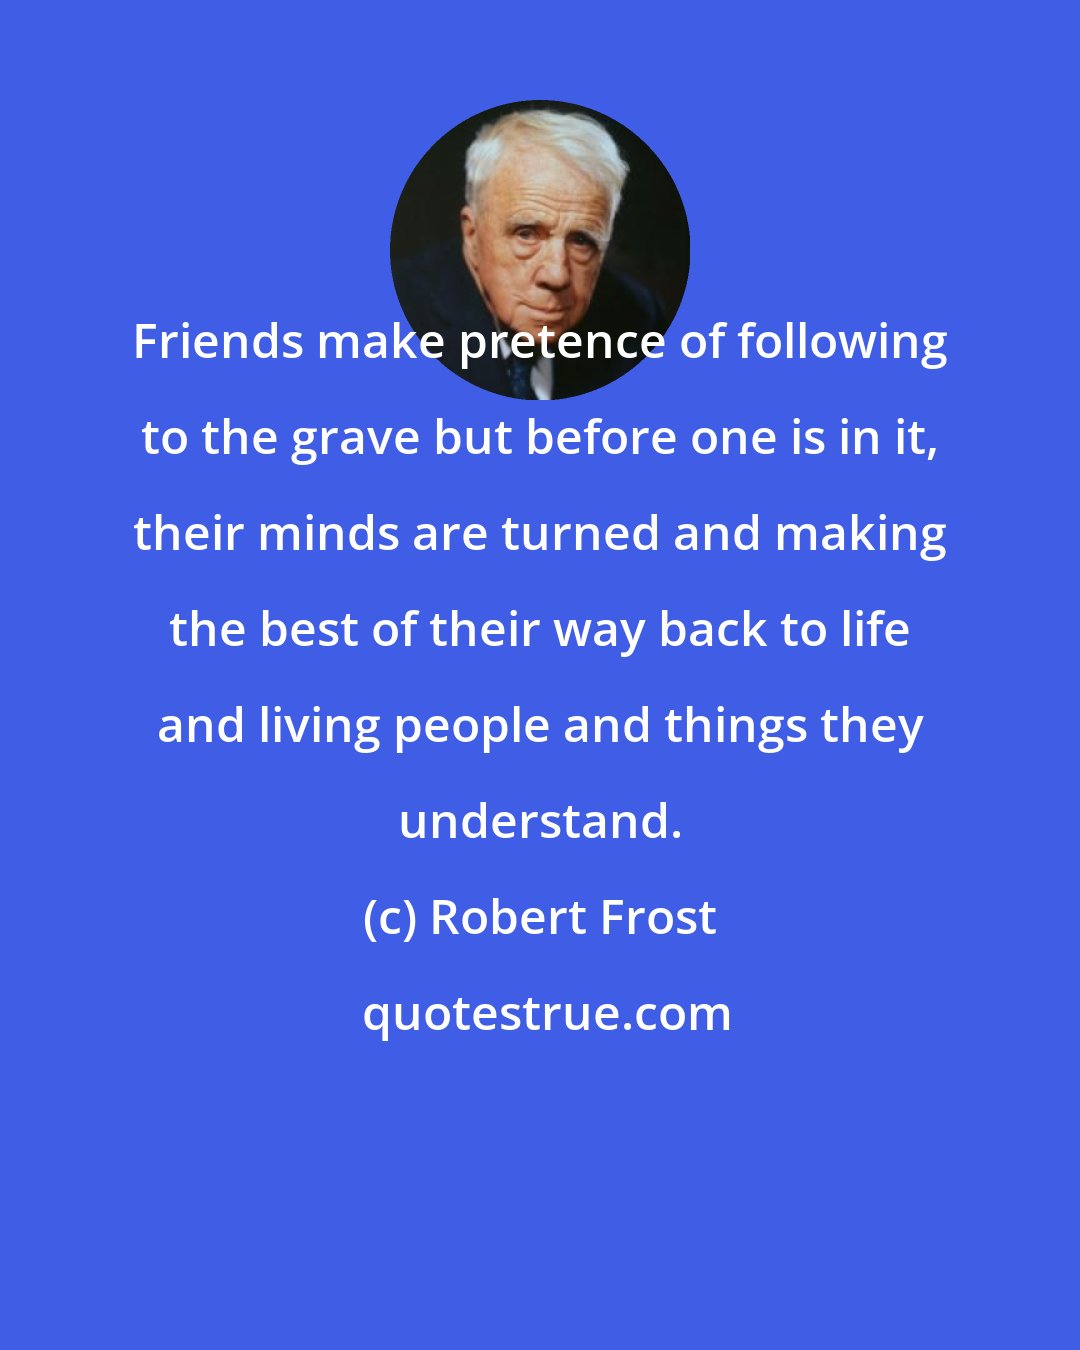 Robert Frost: Friends make pretence of following to the grave but before one is in it, their minds are turned and making the best of their way back to life and living people and things they understand.